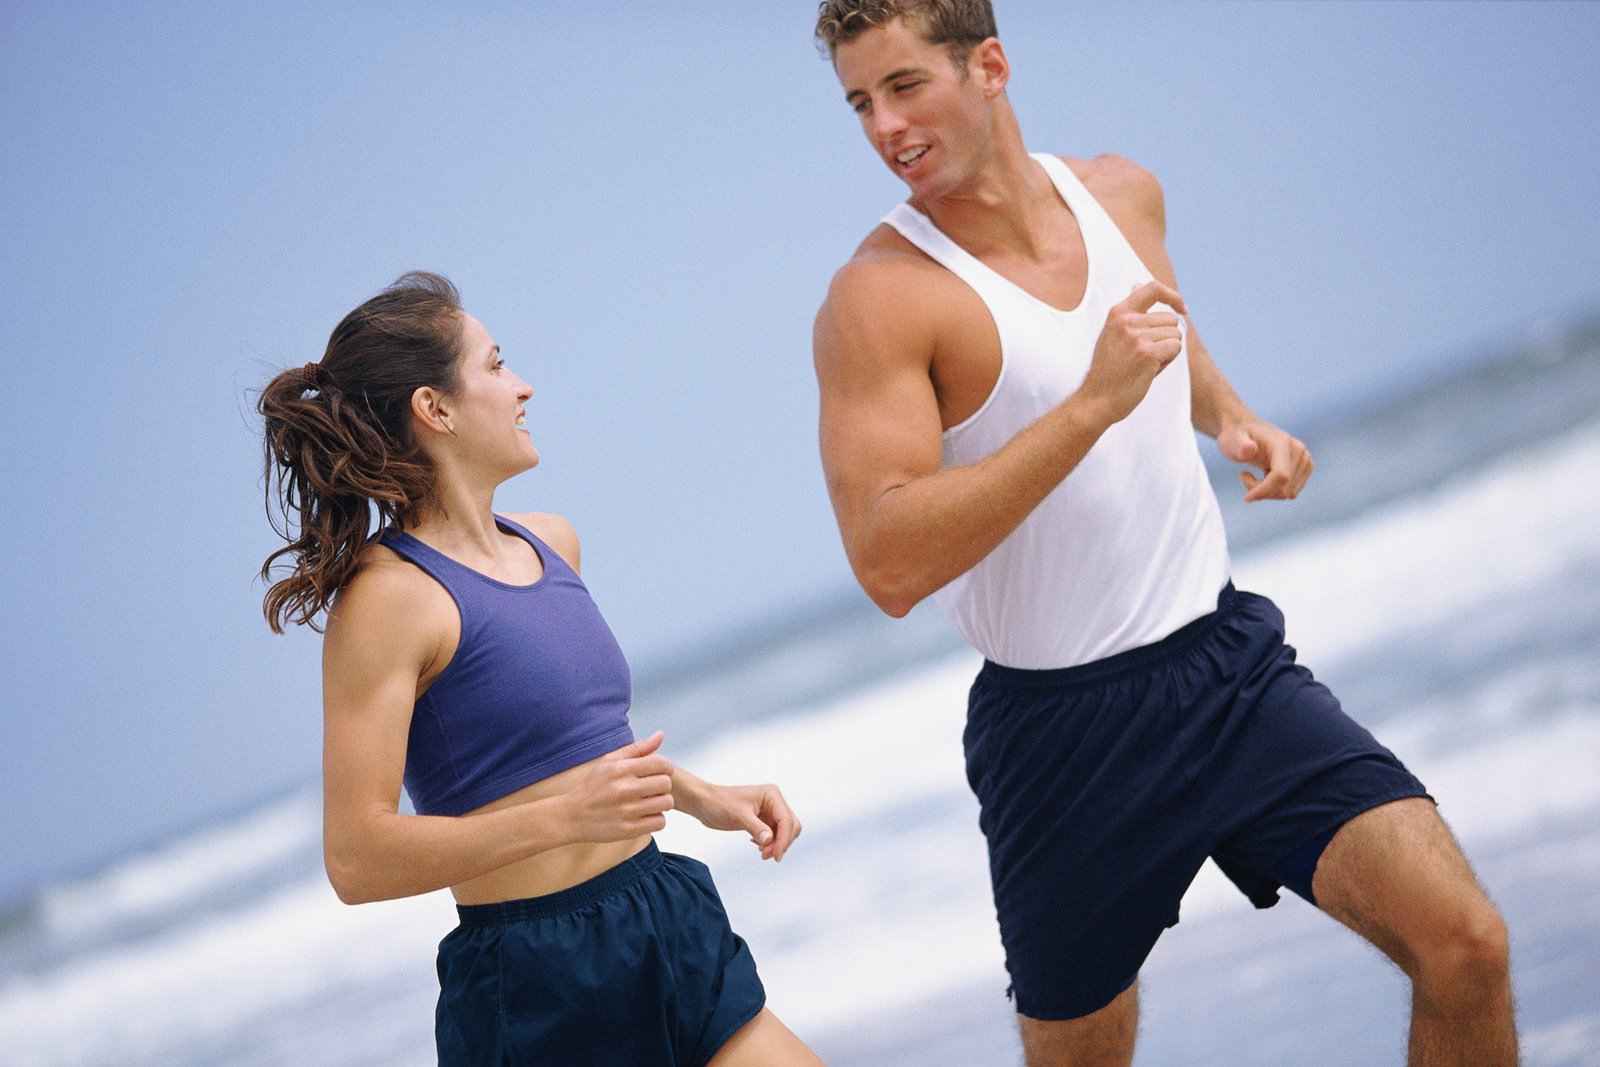 physical exercises to stay fit and healthy